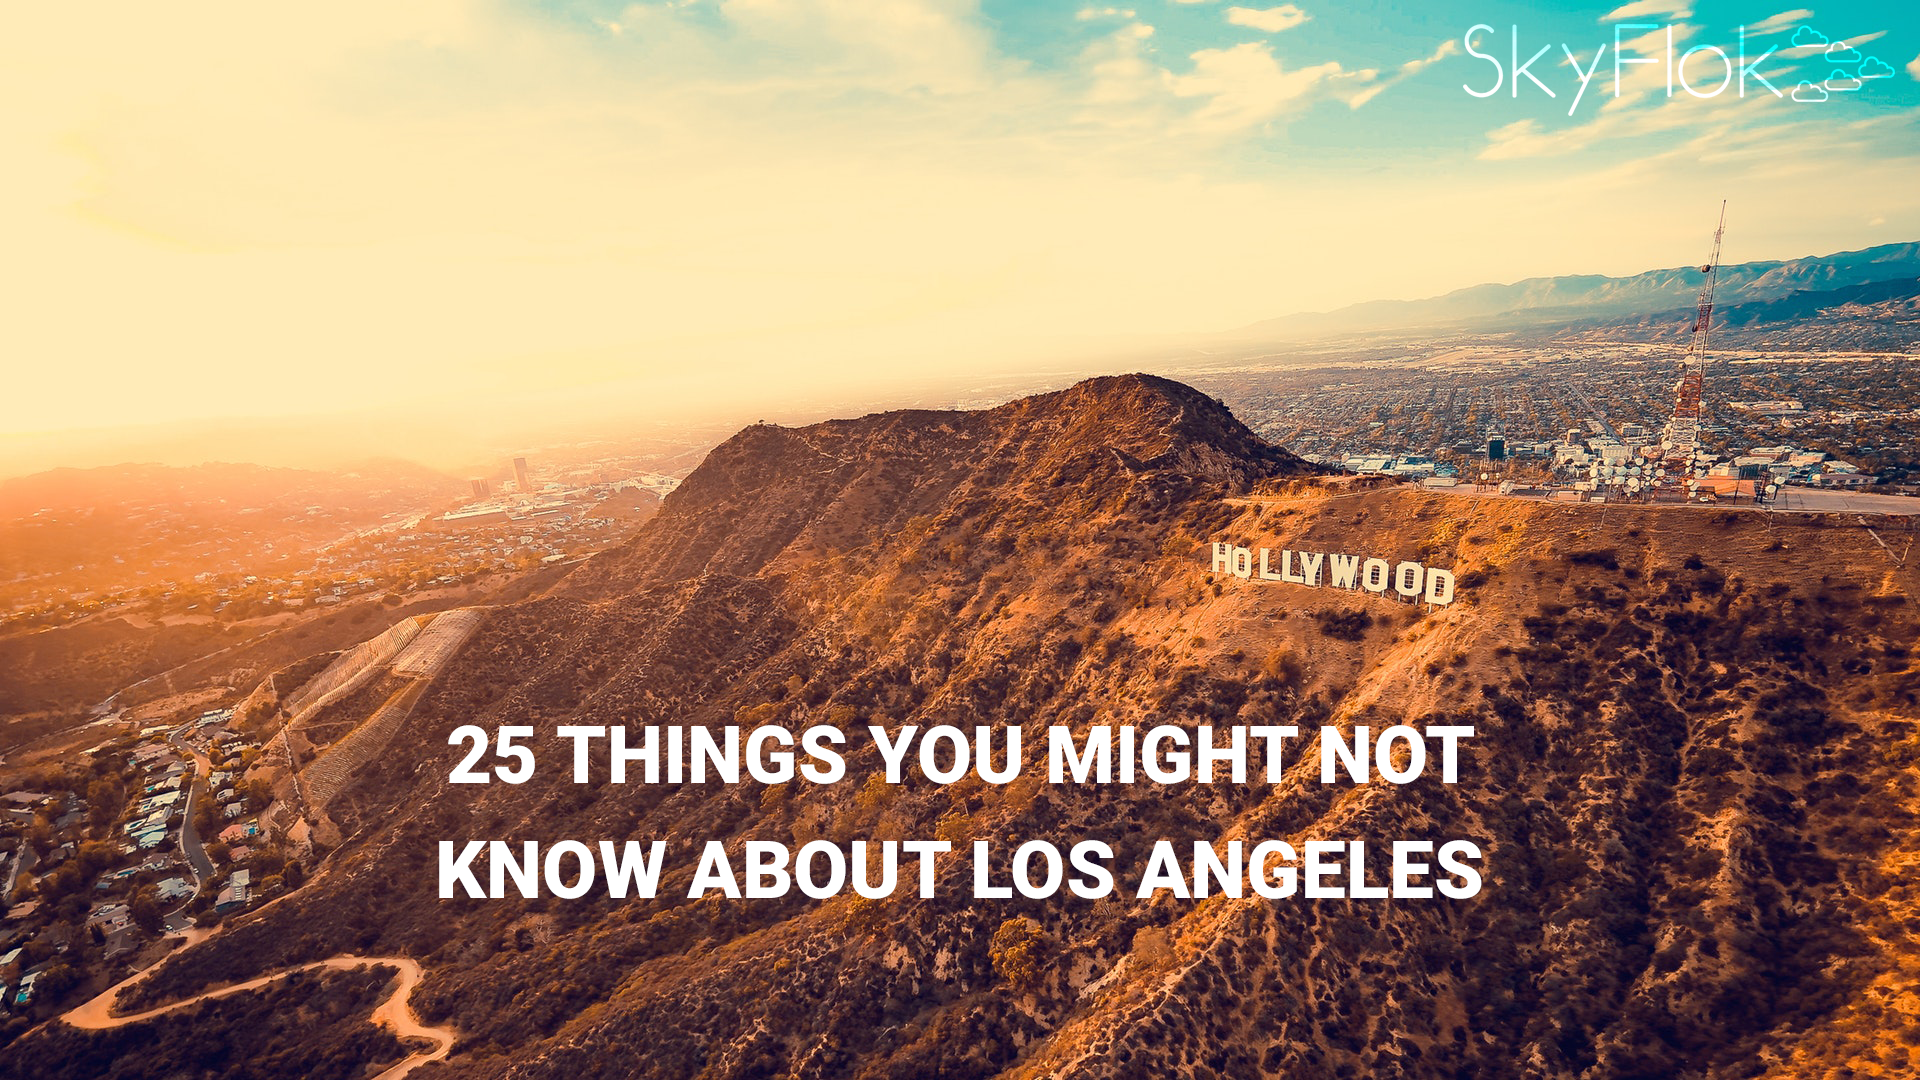 25 Things You Might Not Know About Los Angeles